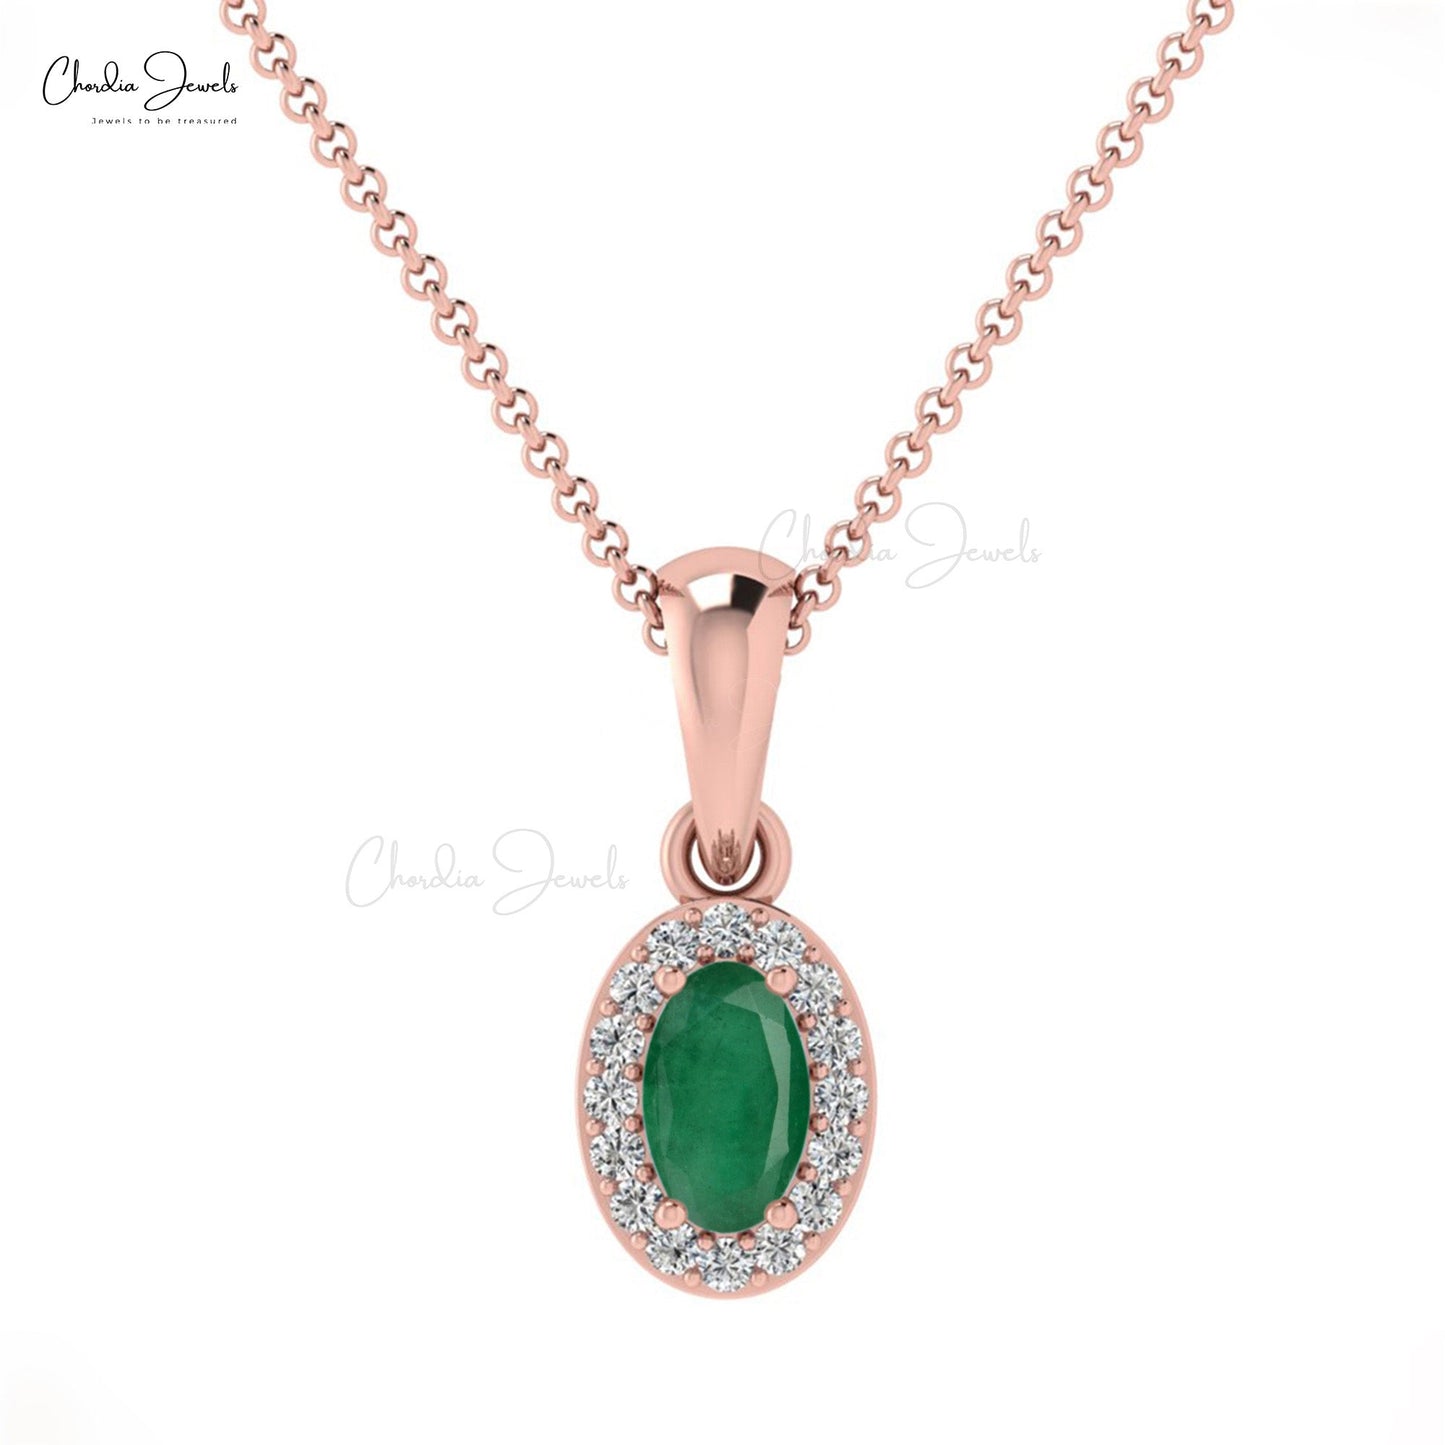 Genuine Emerald Halo Pendant With Diamond Accents 14k Solid Gold Birthstone Pendant For Her